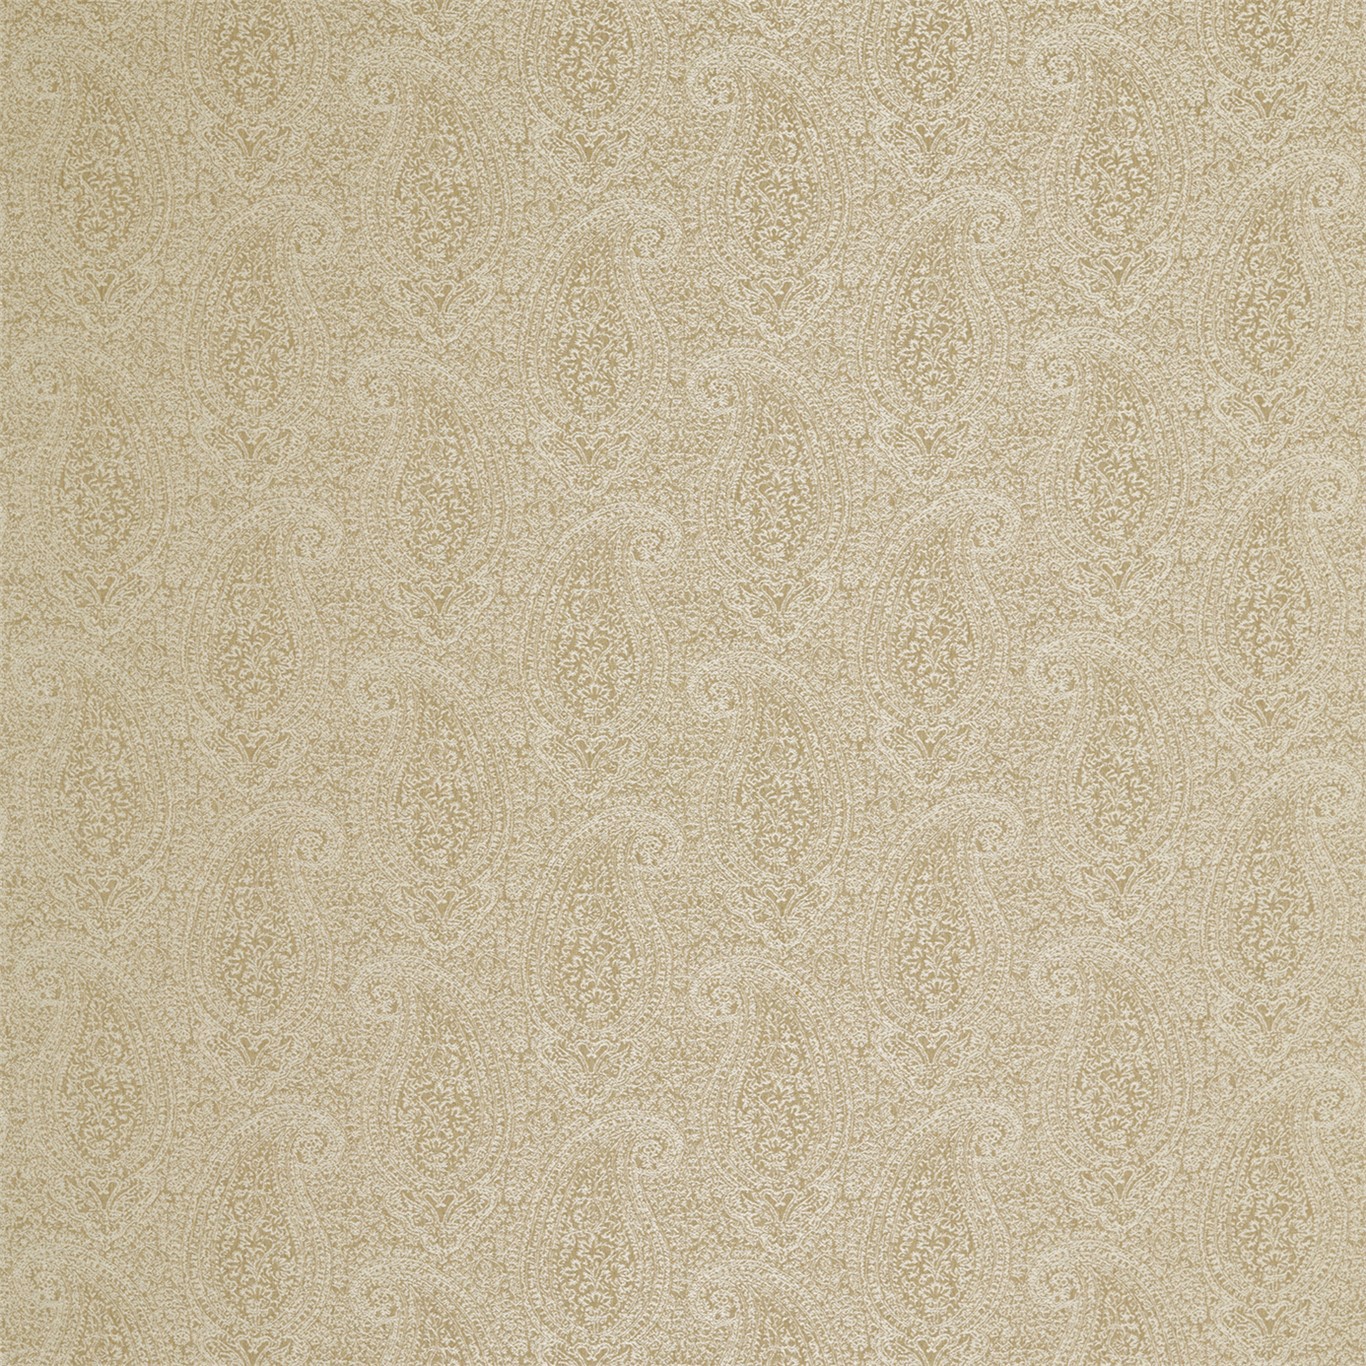 Cleadon Gold Fabric by ZOF